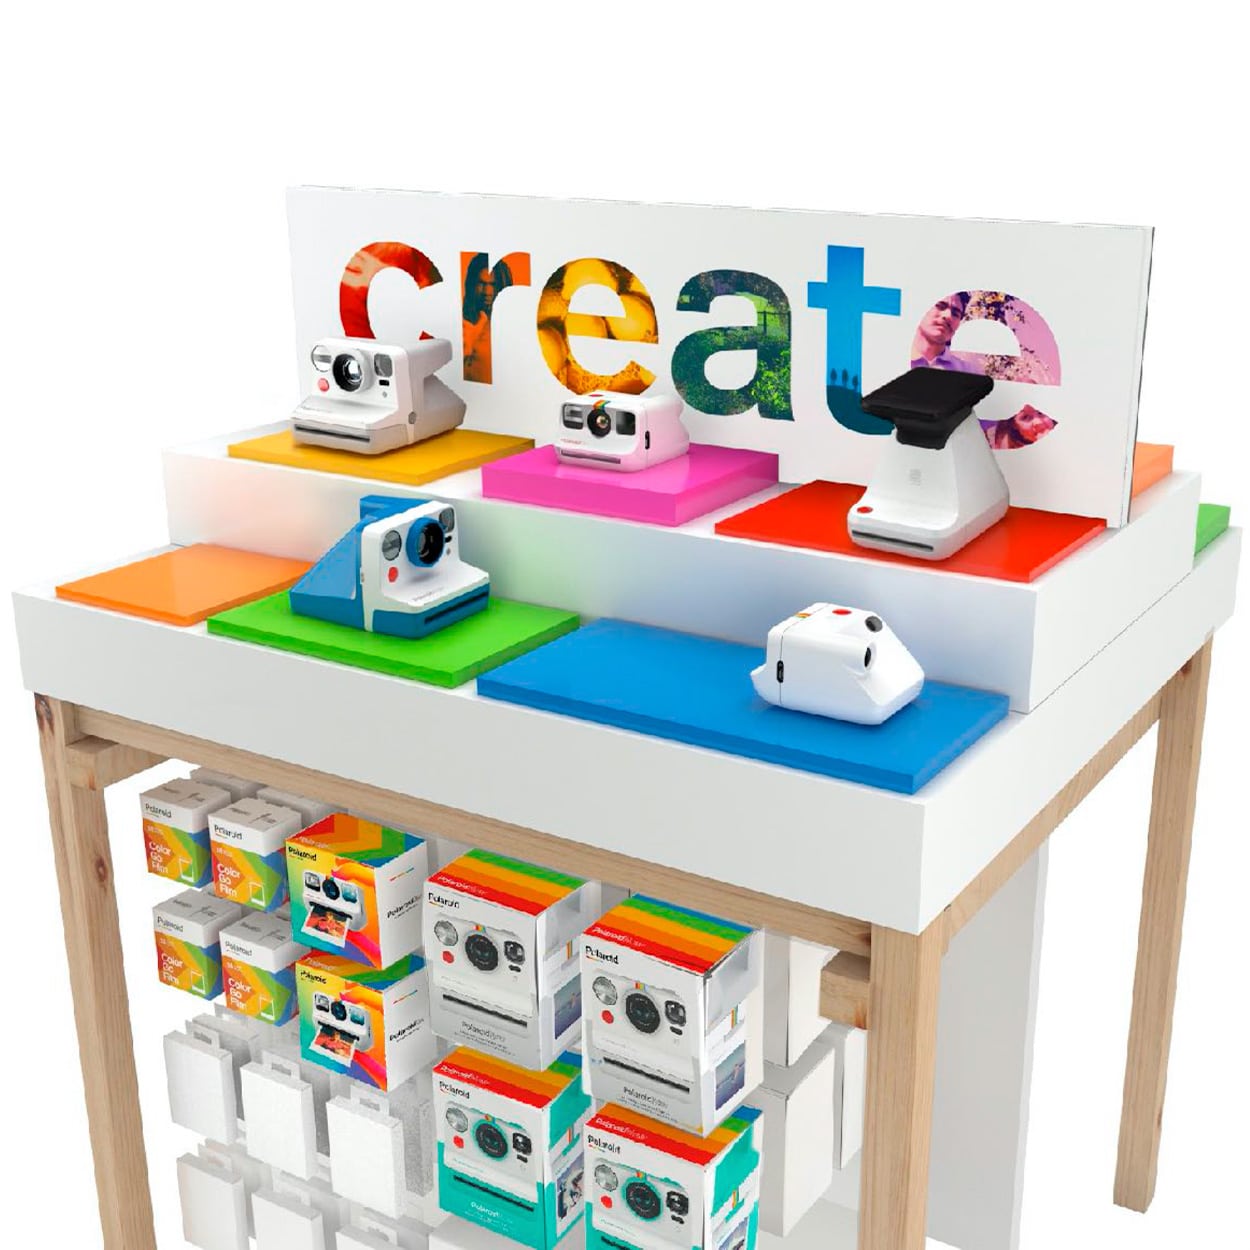 A display stand showcases colorful Polaroid instant cameras. The word "create" is prominently featured above the cameras in vibrant letters. Below the display, various camera accessories and boxes are neatly organized, celebrating the brand's rebirth with a bright, inviting design.